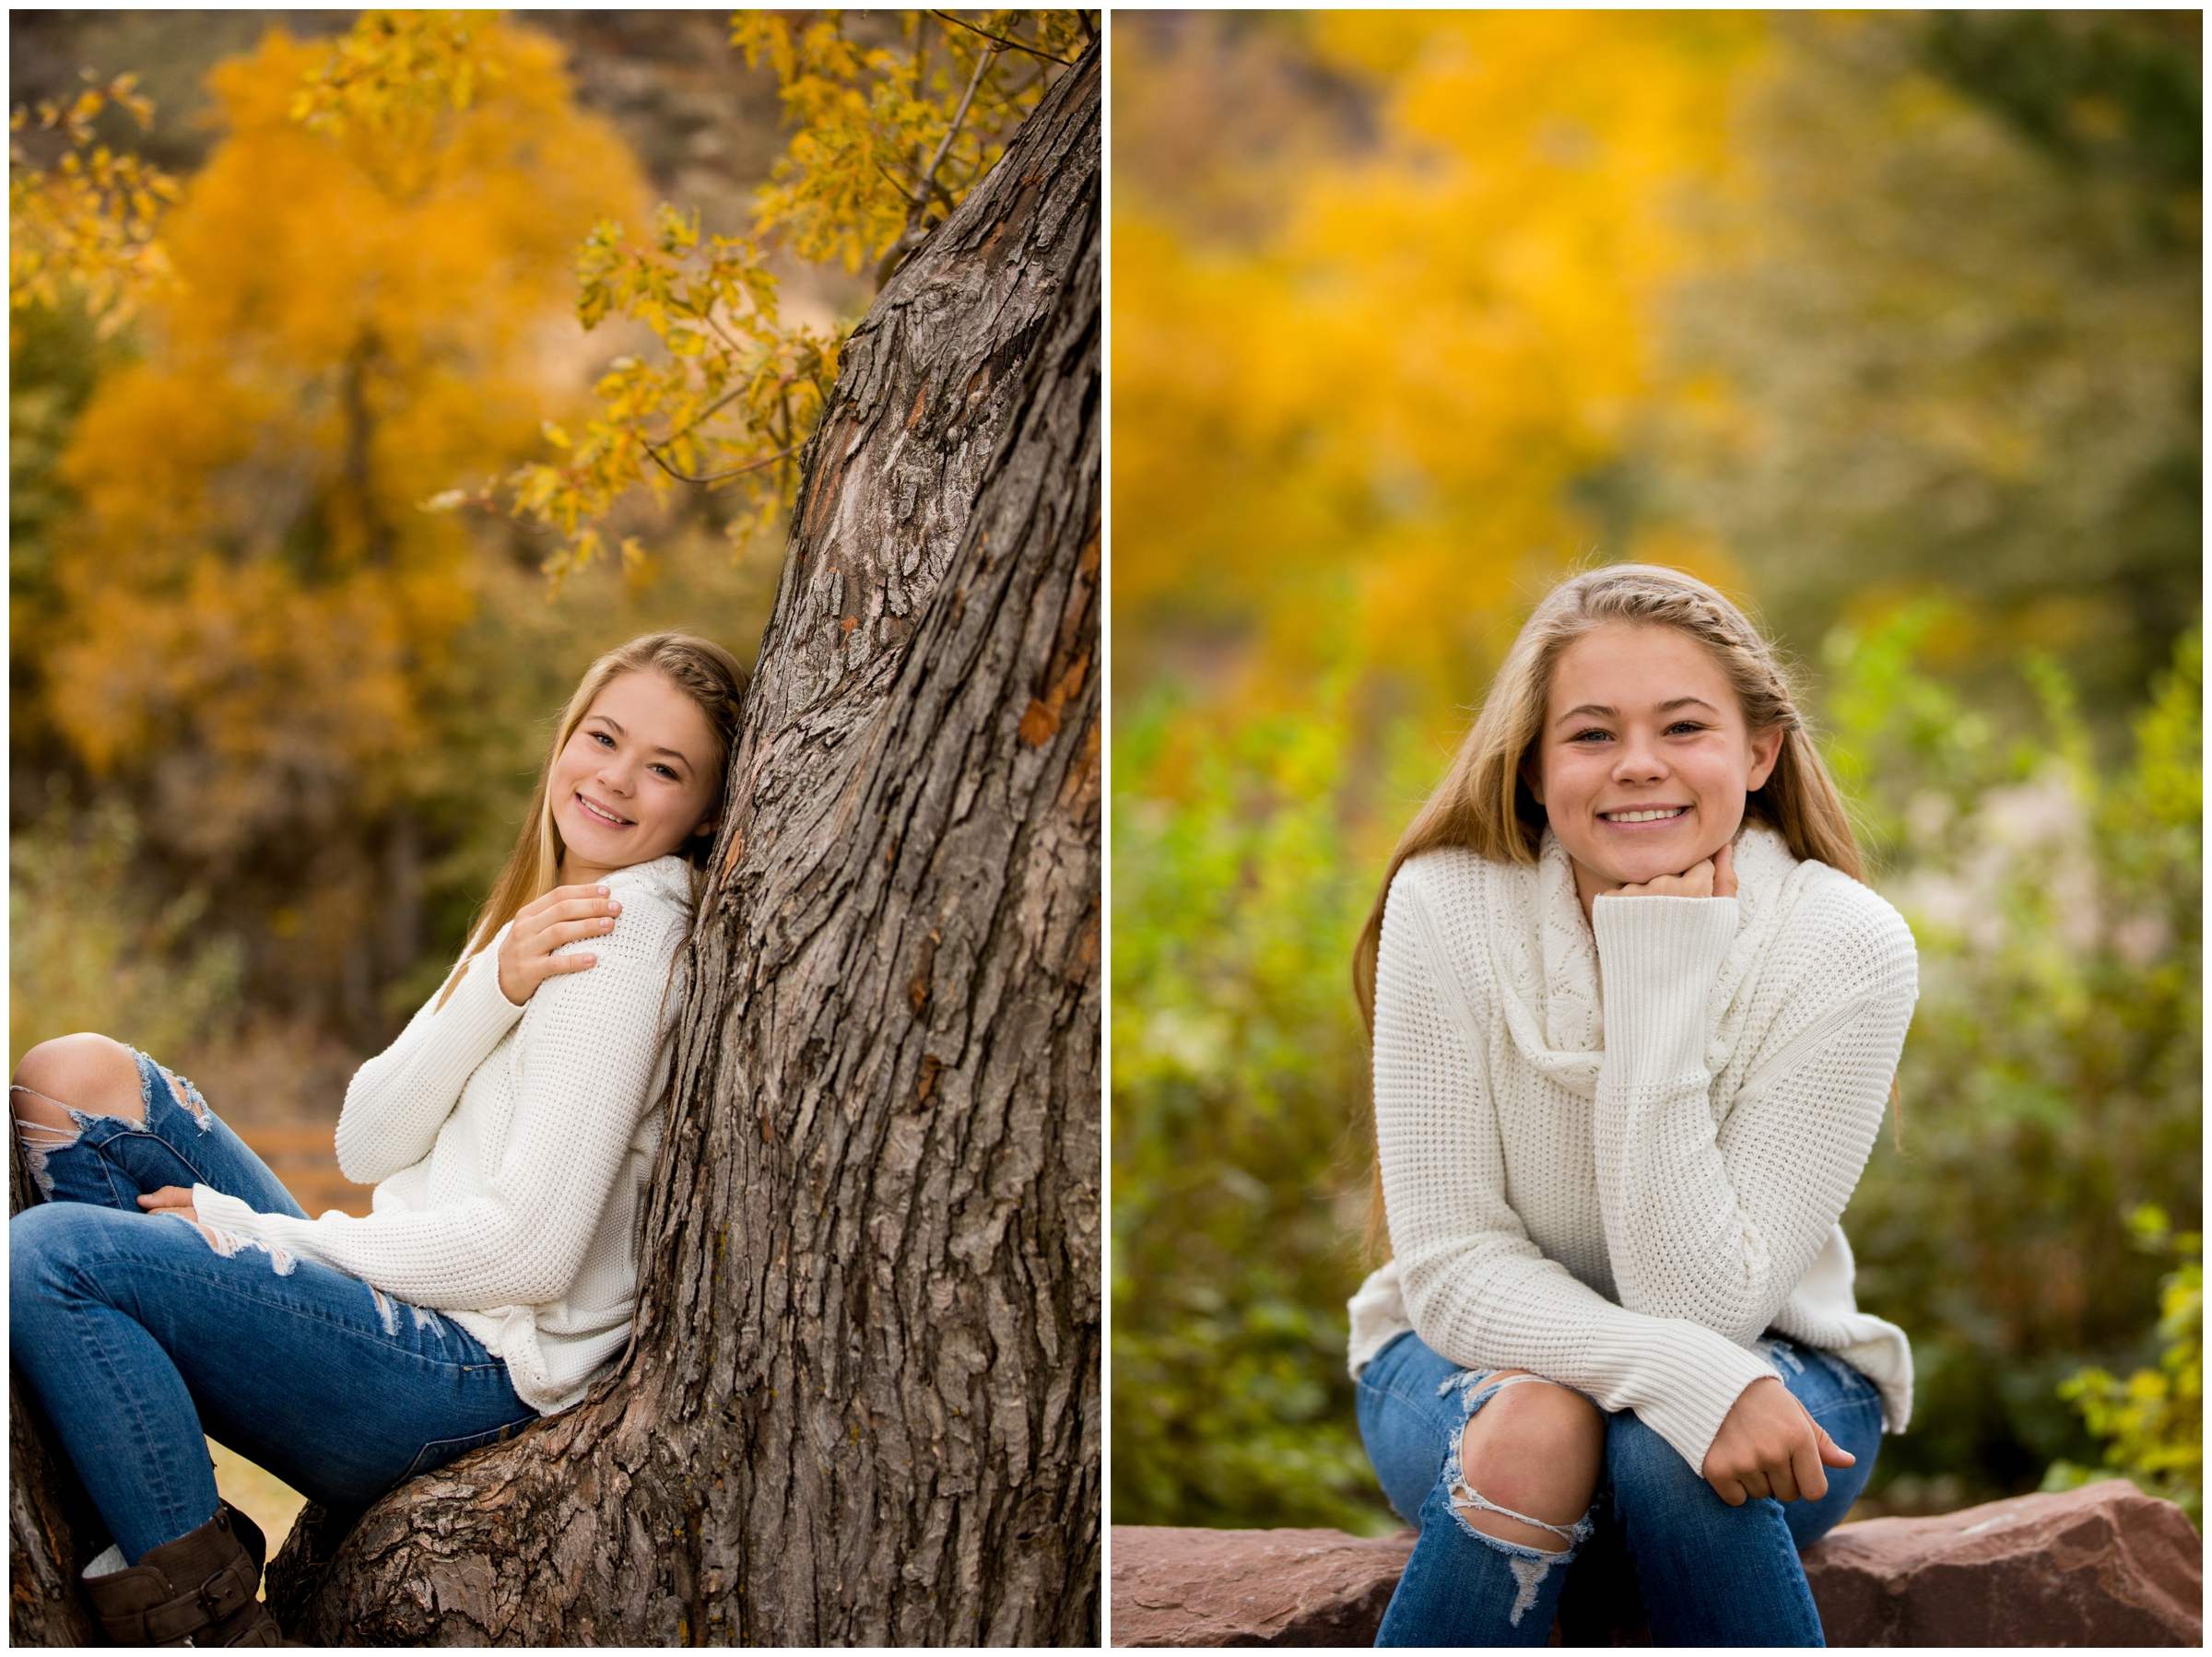 Niwot Colorado senior pictures with fall foliage in background 